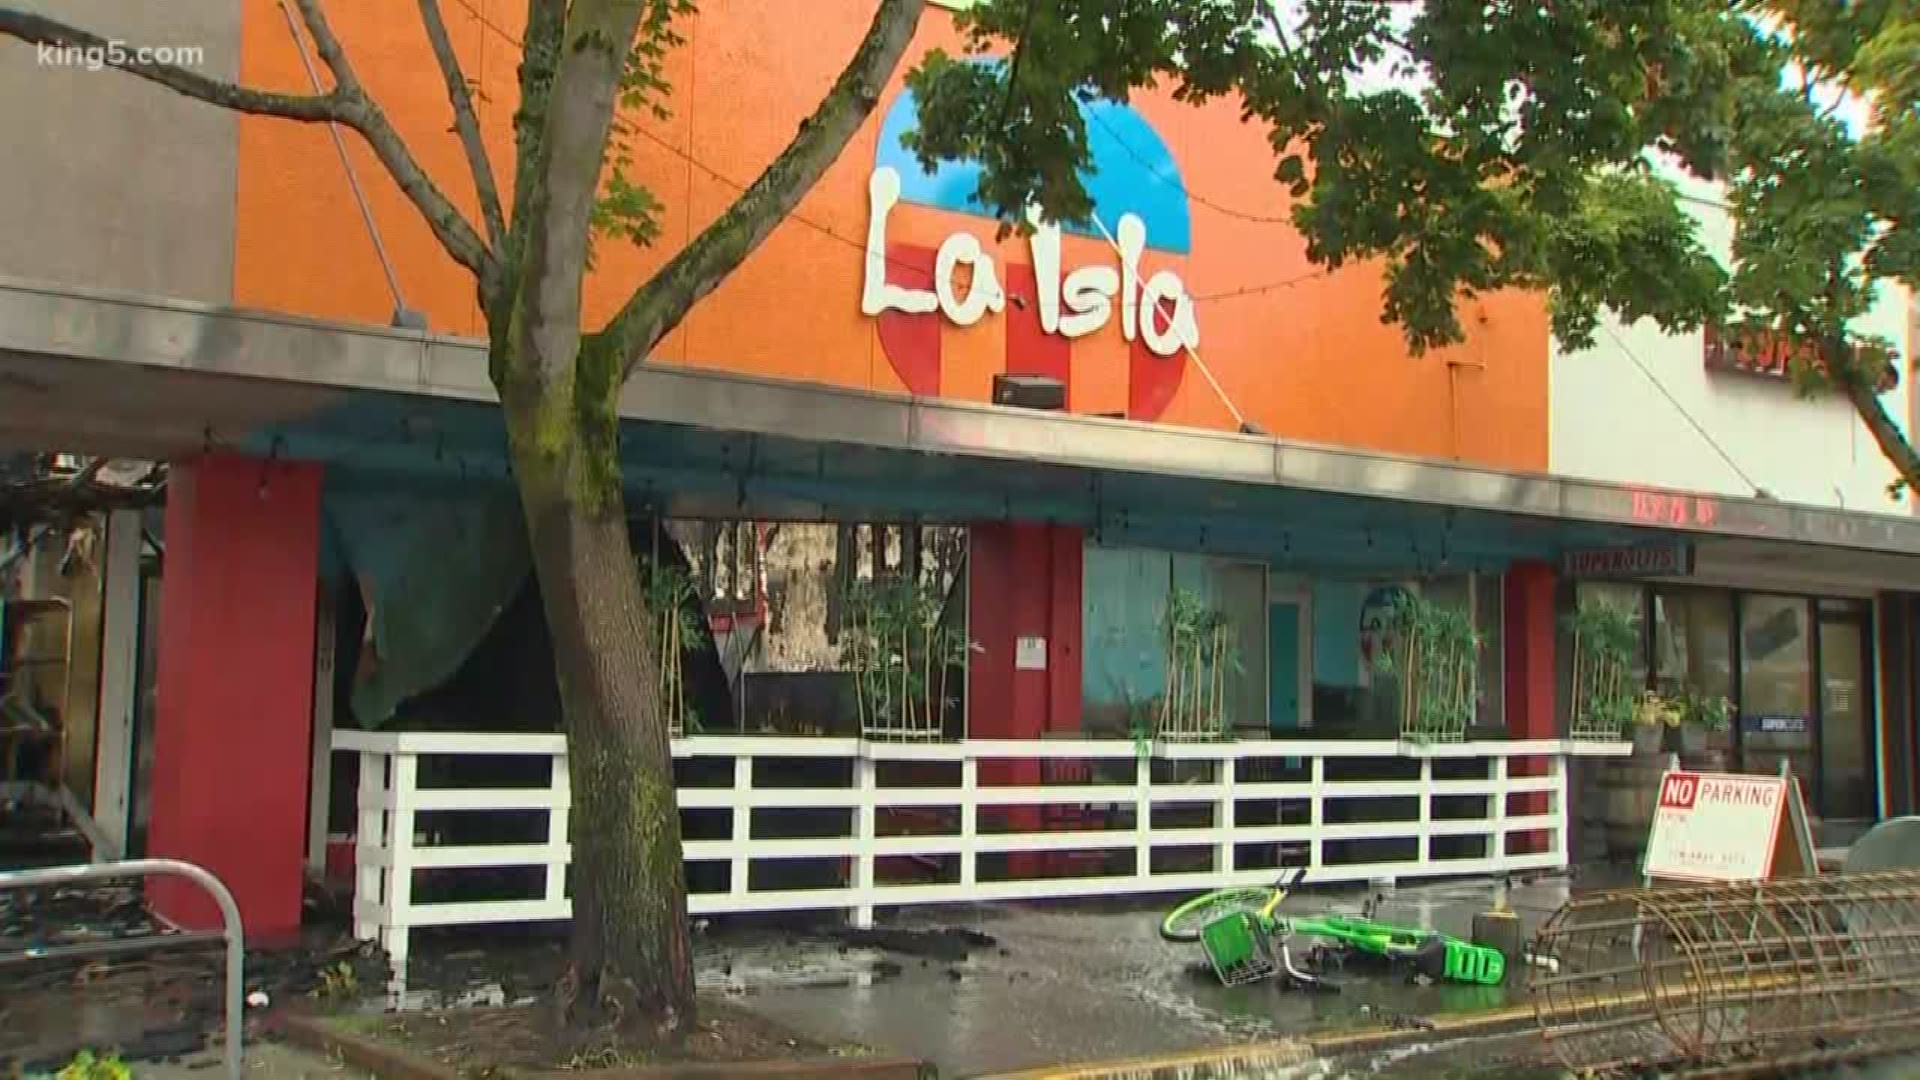 La Isla was a gathering place for Seattle’s Puerto Rican community and provided a way for them to send help to the island after it was devastated by the 2017 storm.